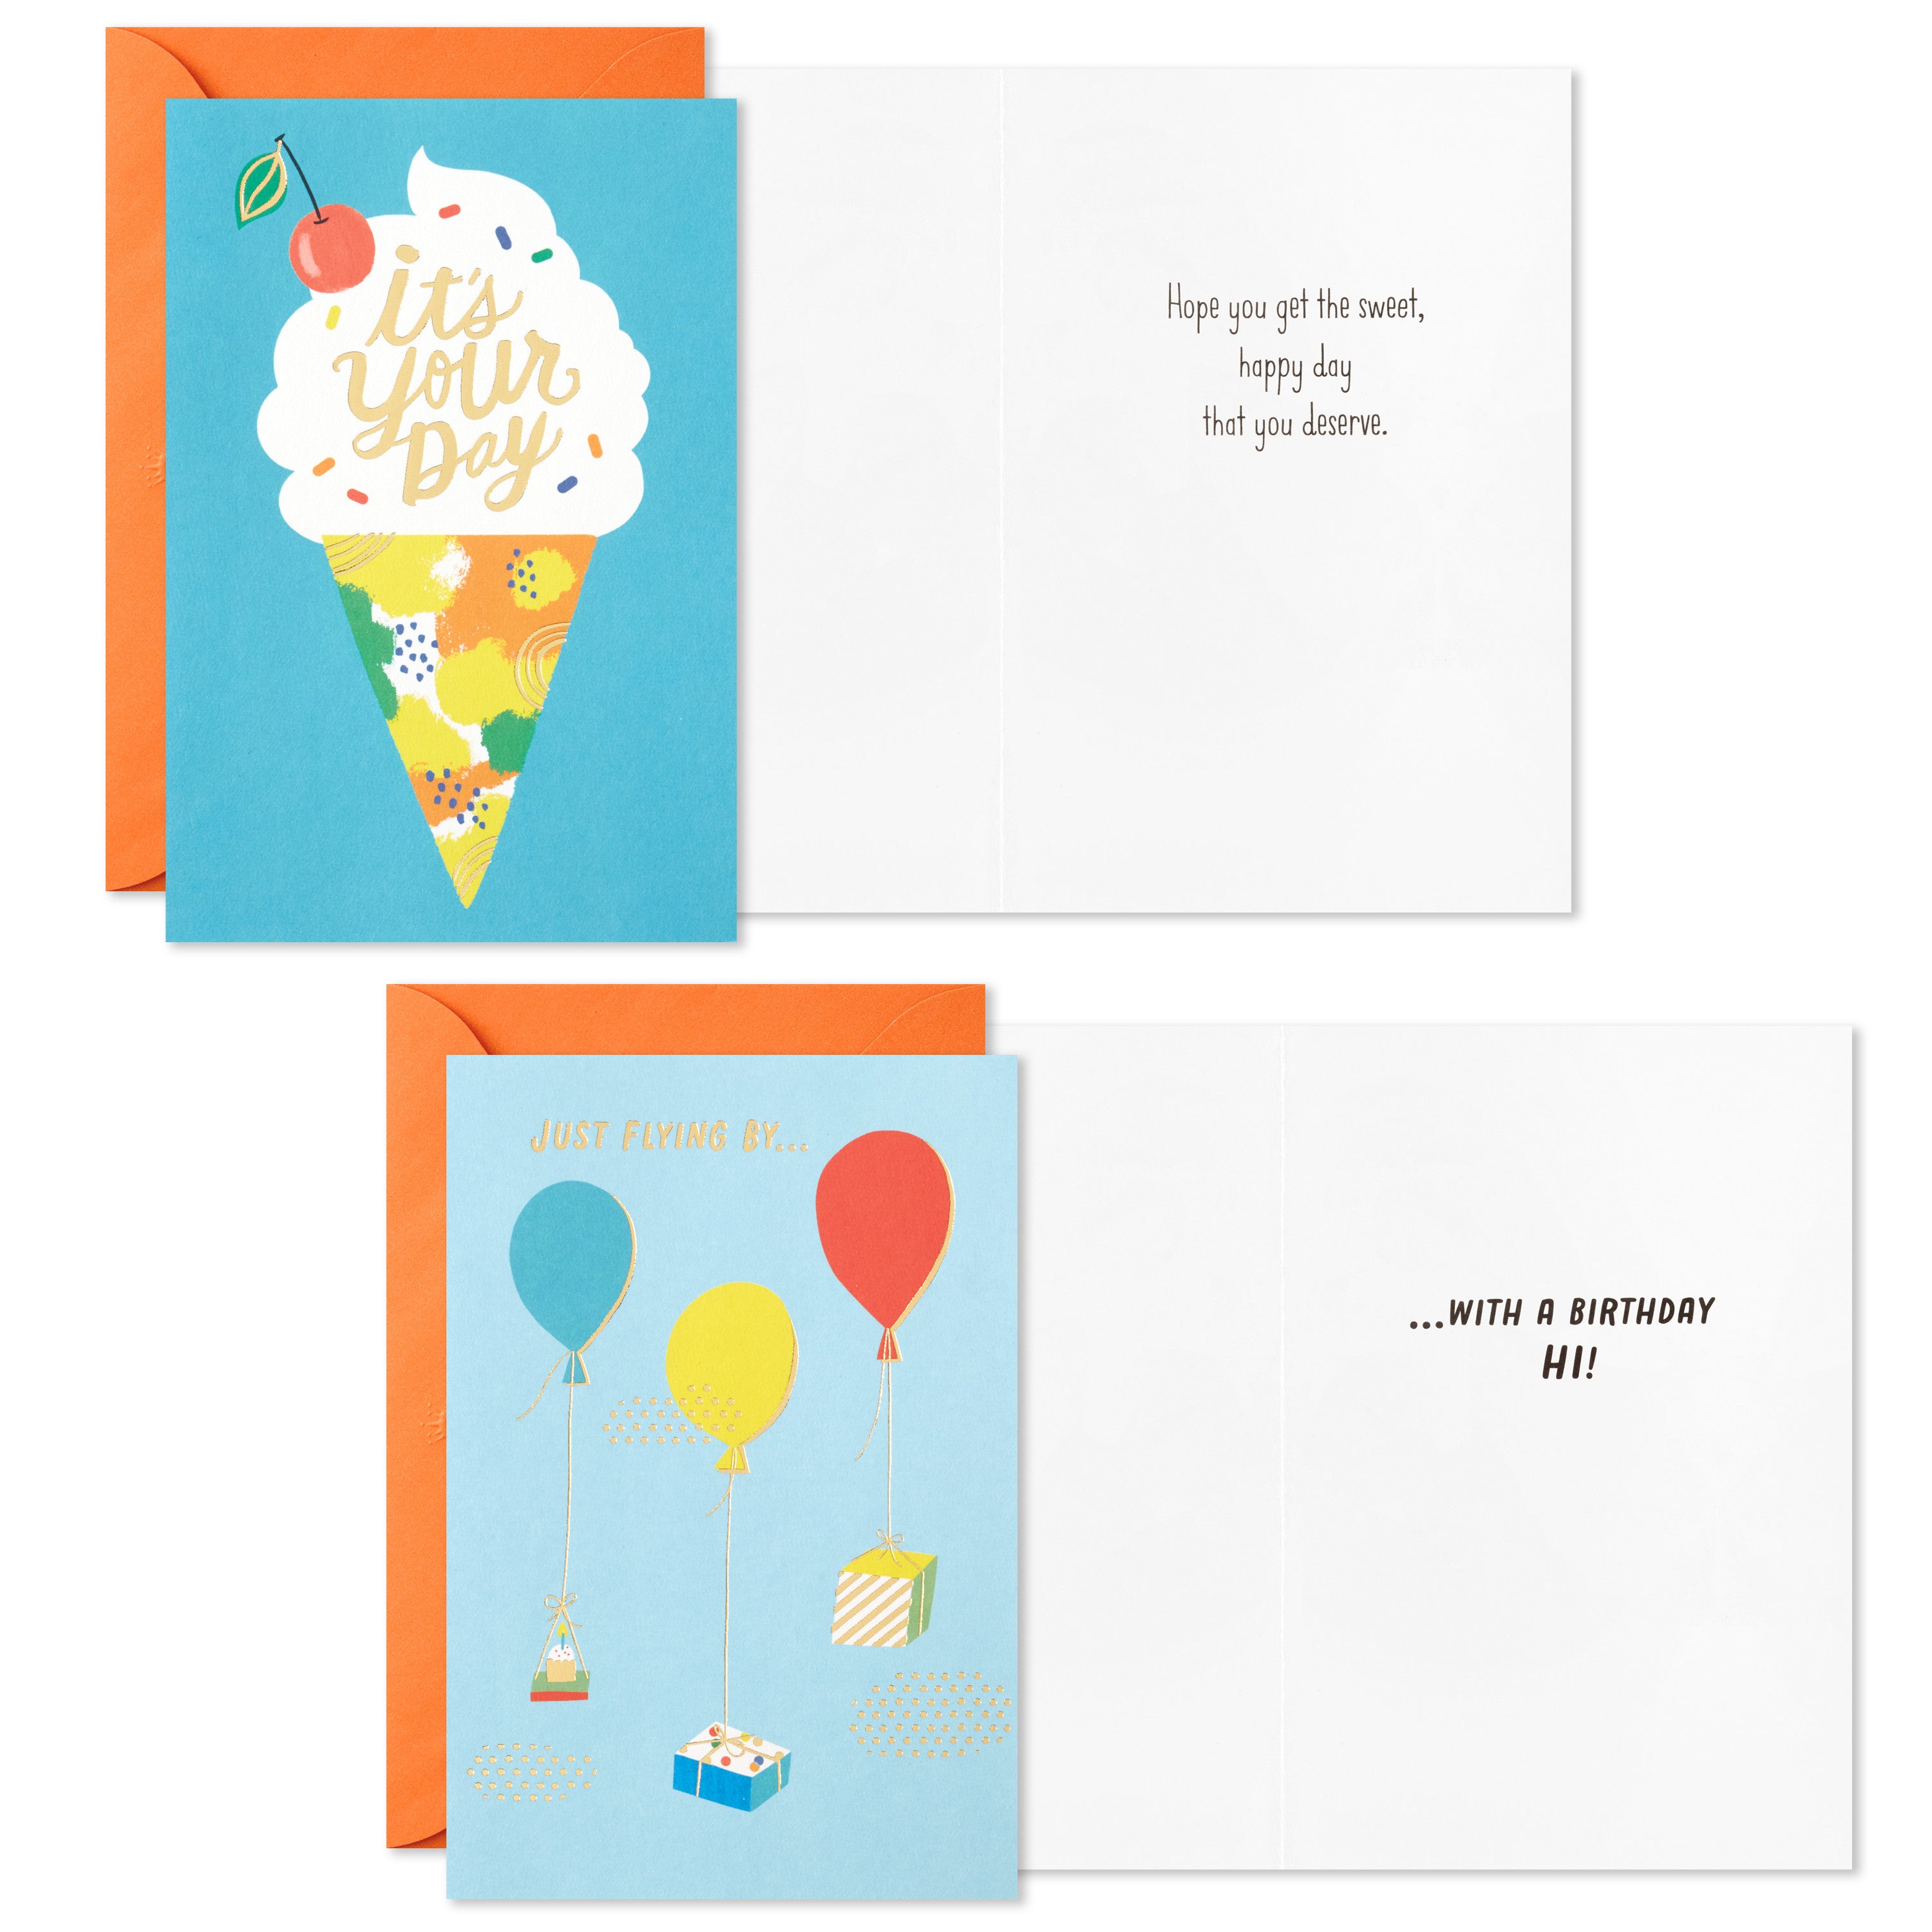 Birthday Cards Assortment, 36 Cards with Envelopes (Cake, Ice Cream, Balloons)